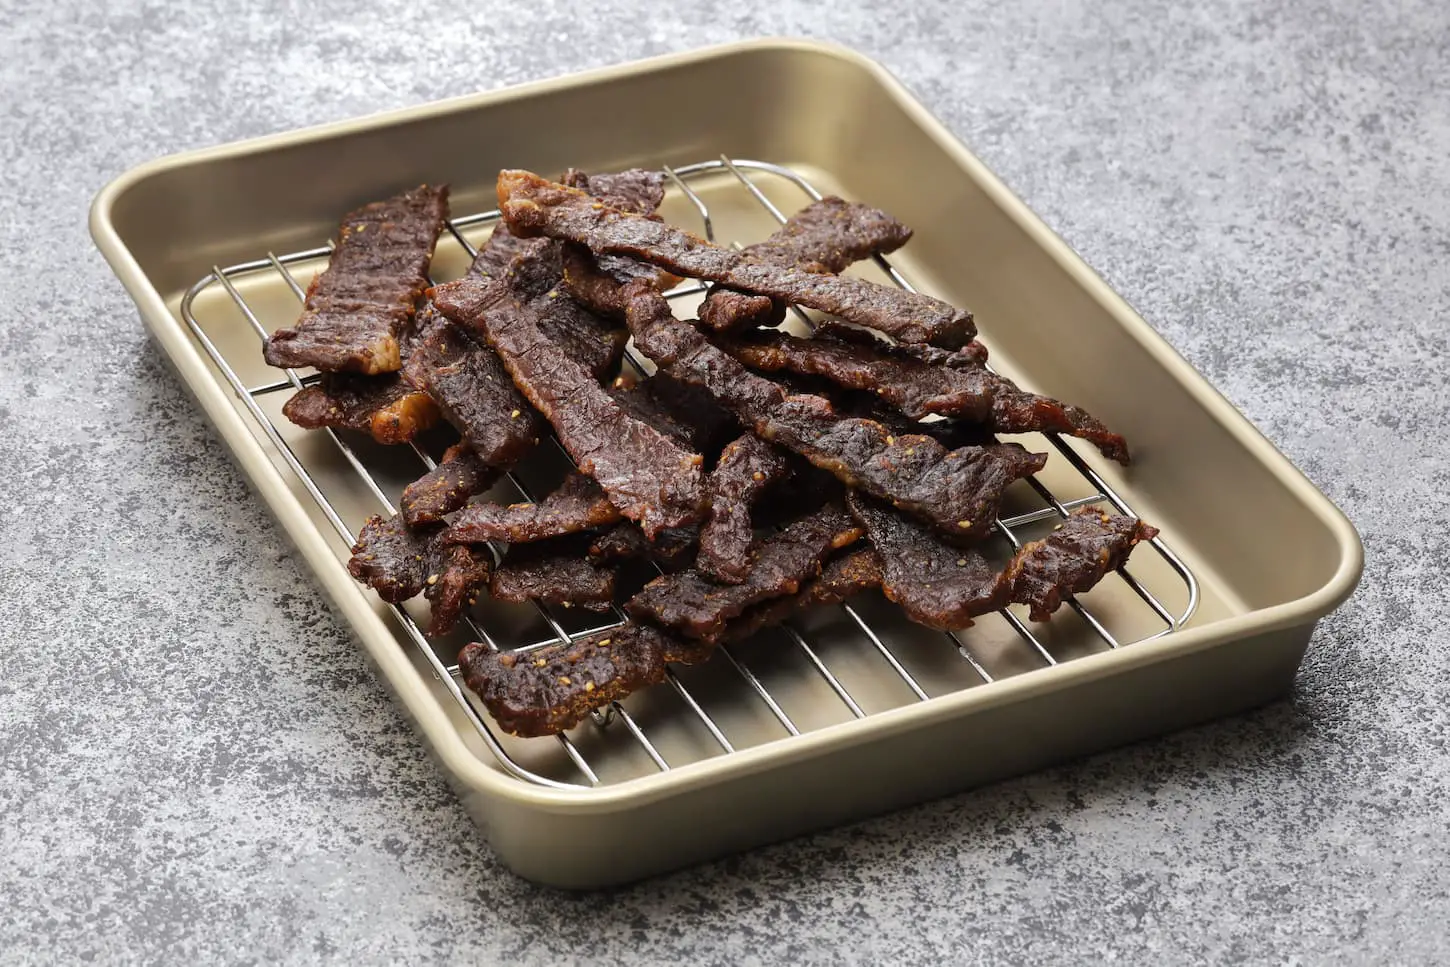 An image of dried homemade beef jerky on a tray.